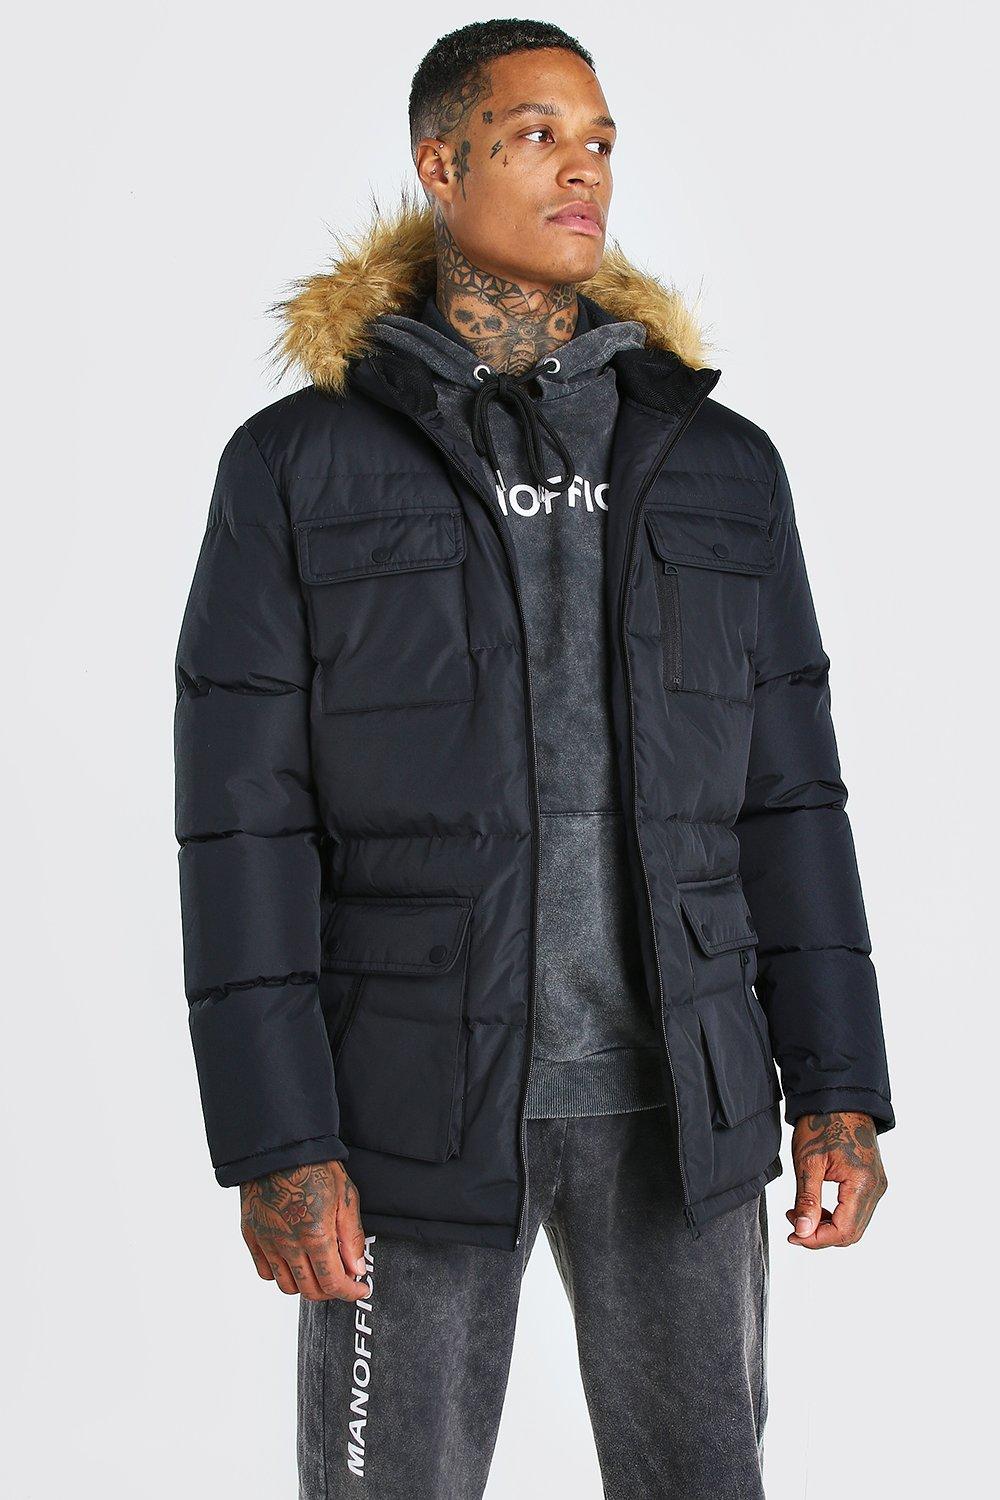 Men's Coats & Jackets Sale Multi Pocket Quilted Parka with Faux Fur Hood